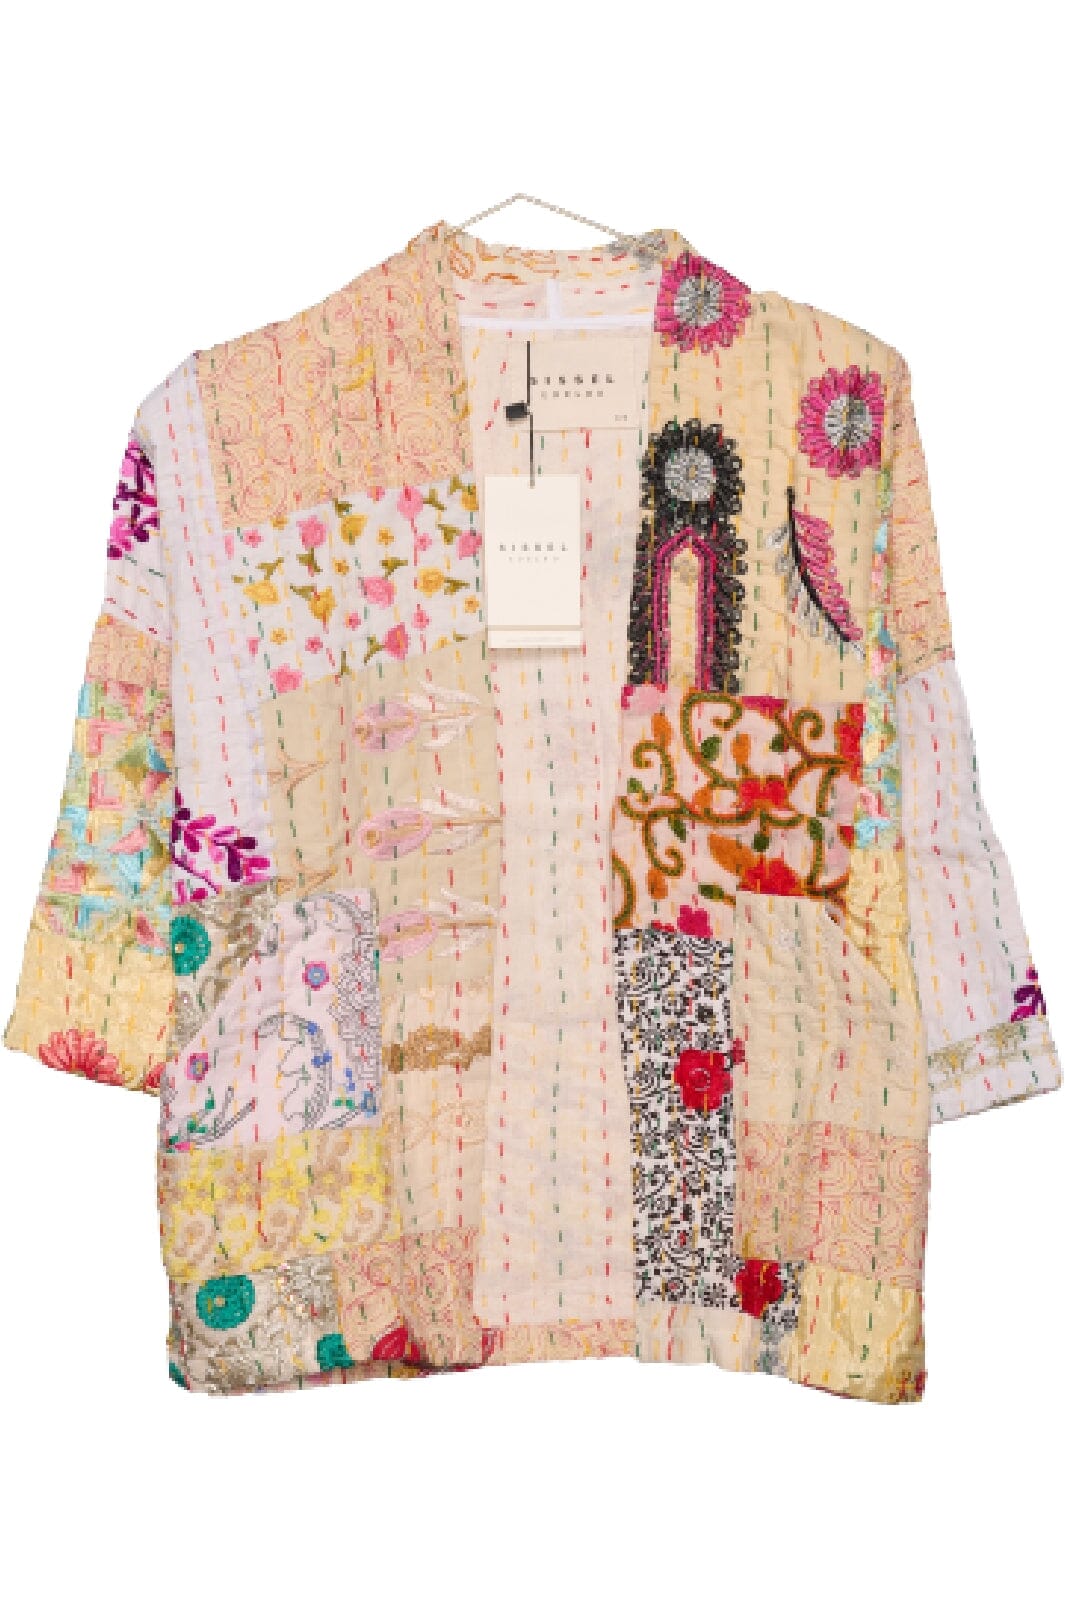 Sissel Edelbo - Tallulah Embroidery Patchwork Jacket,Tallulah Embroidery Patchwork Jacket - No. 427 Jakker 